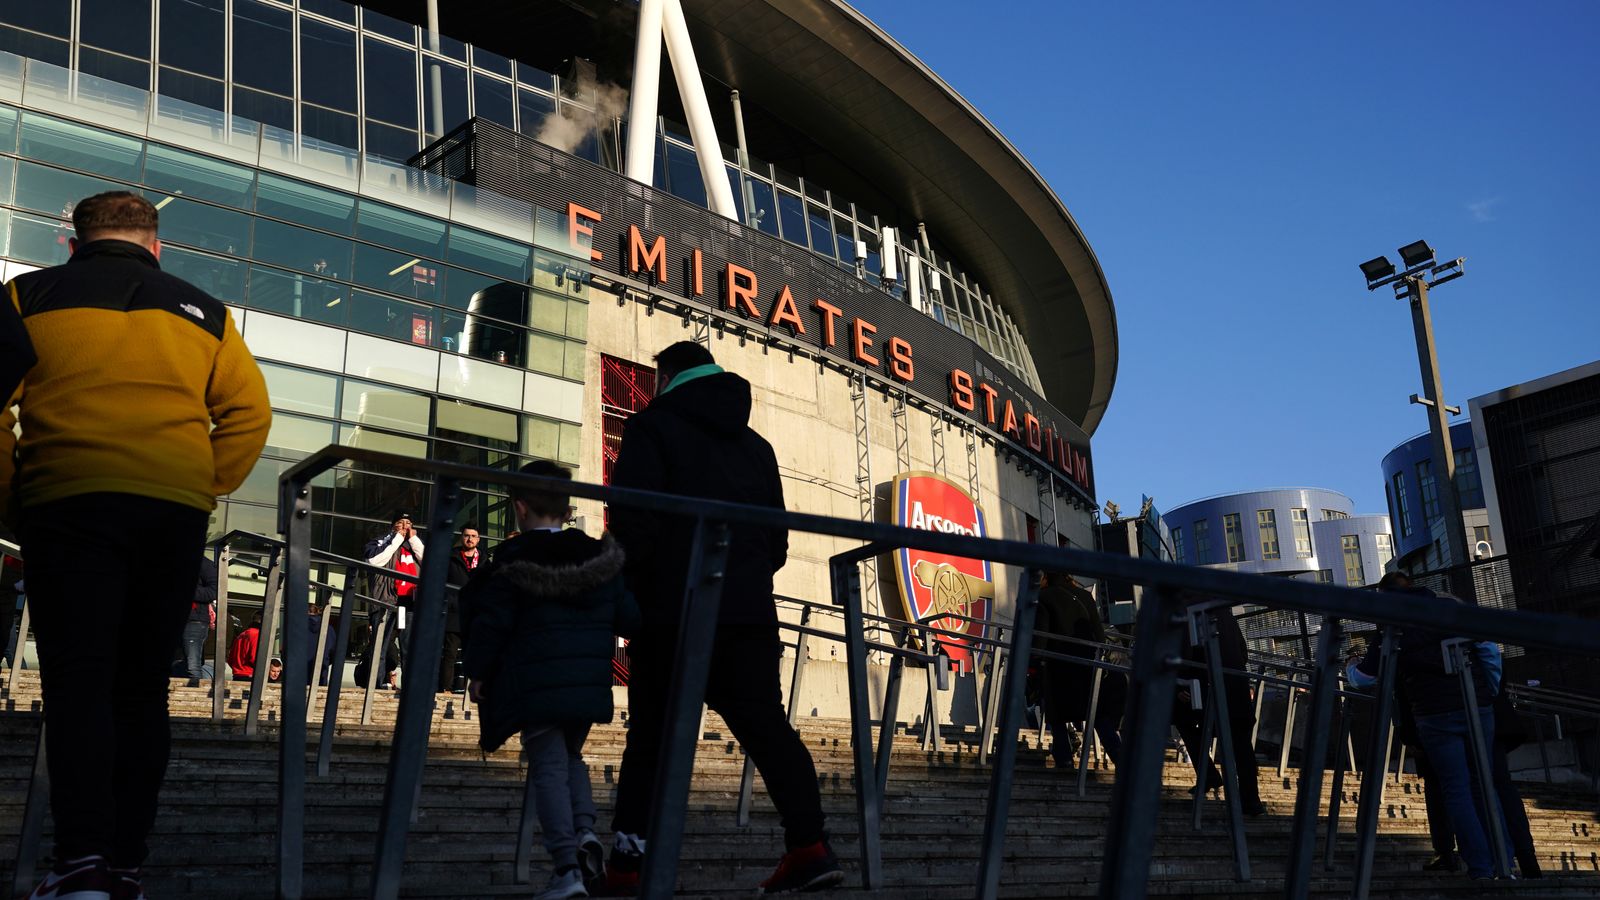 Security heightened for Champions League fixtures after alleged terror threats